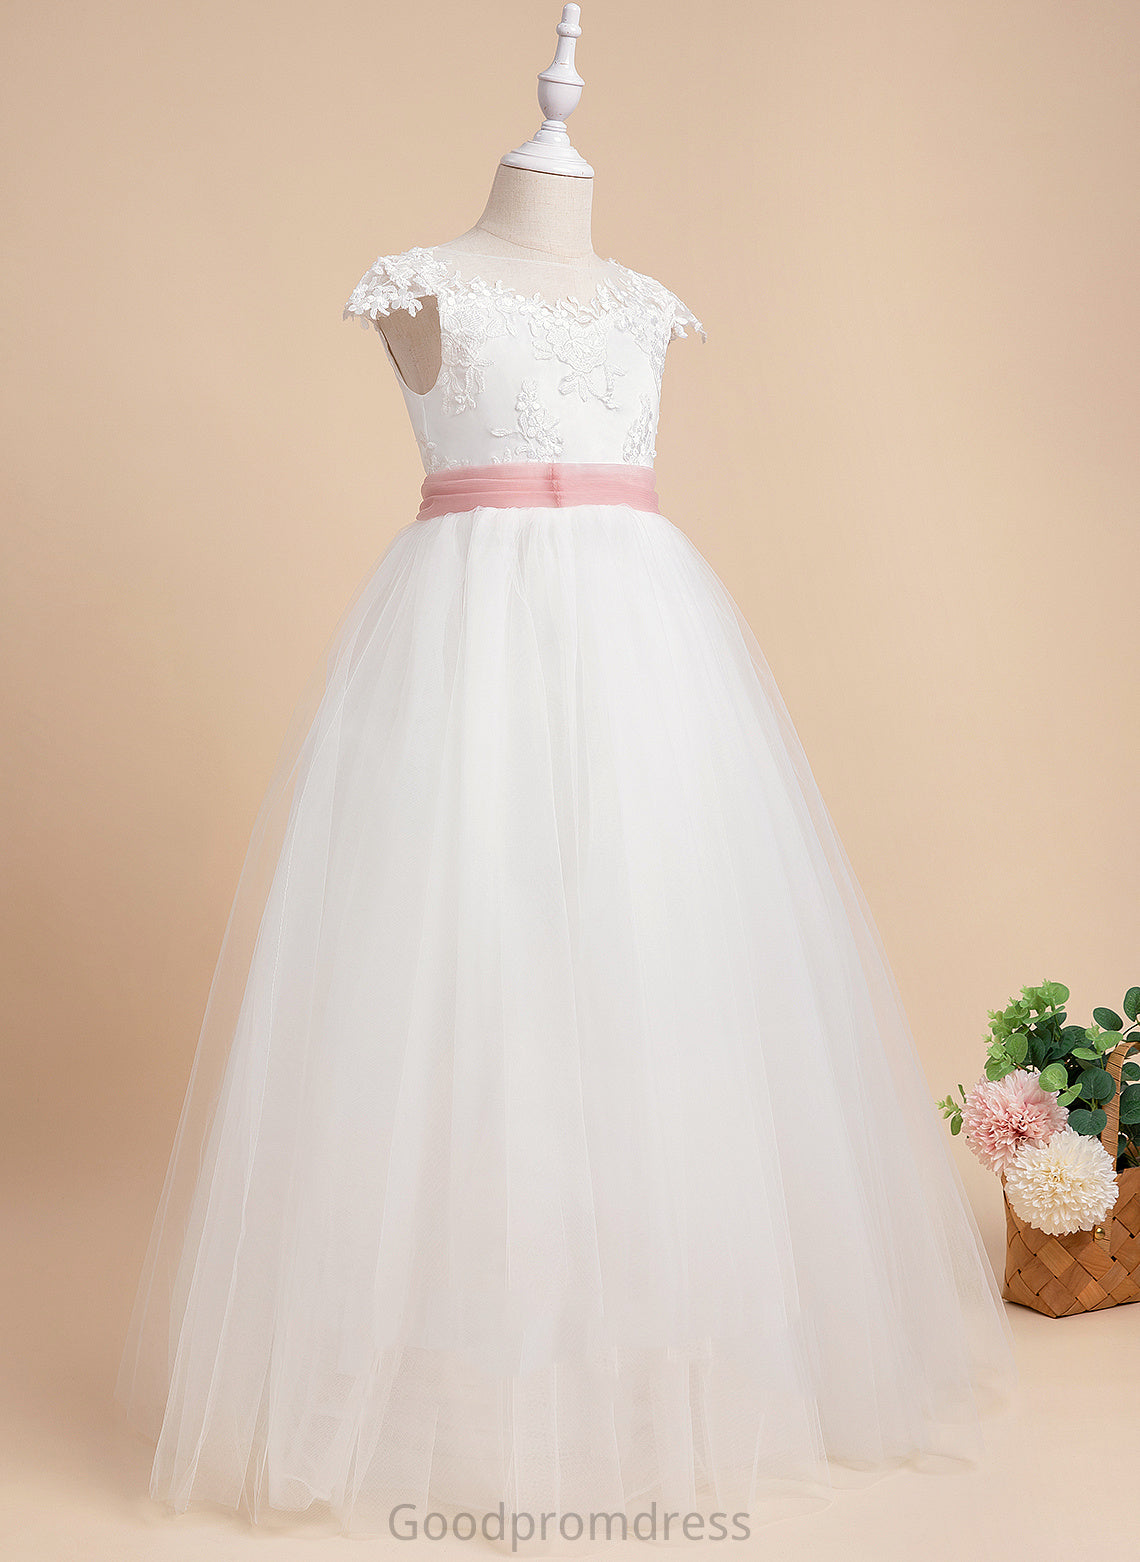 - Dress Floor-length Ella Scoop Neck With Lace Girl Lace/Sash Ball-Gown/Princess Flower Girl Dresses Flower Sleeveless